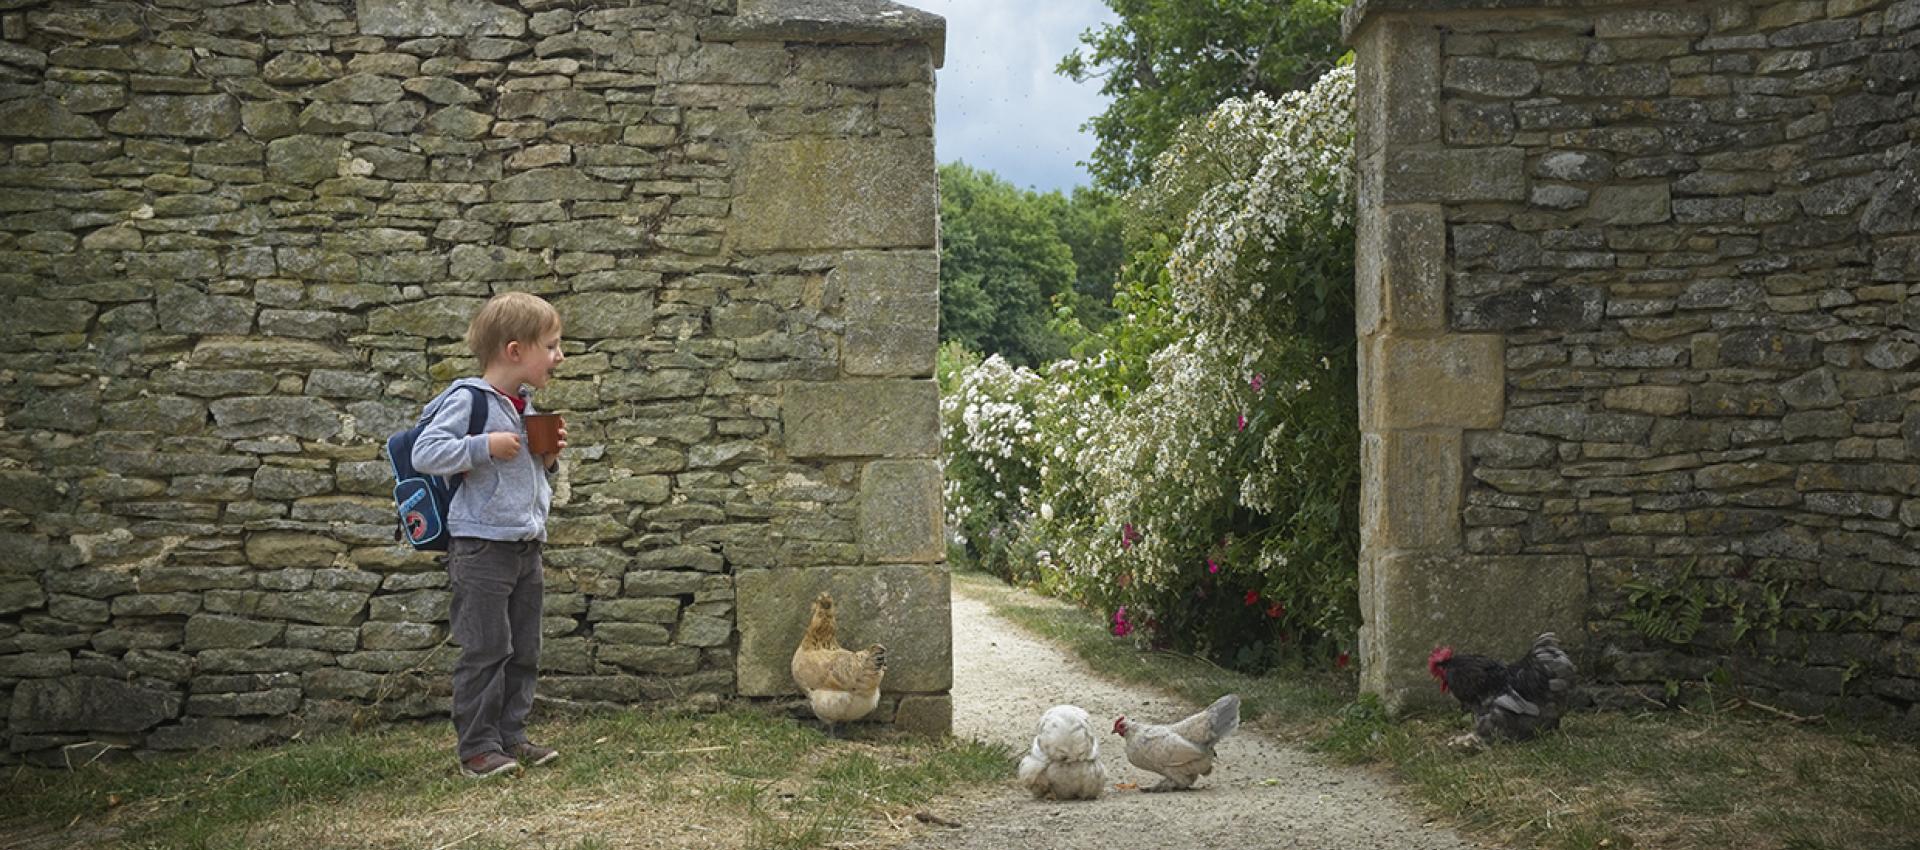 Boy with chicken in grounds